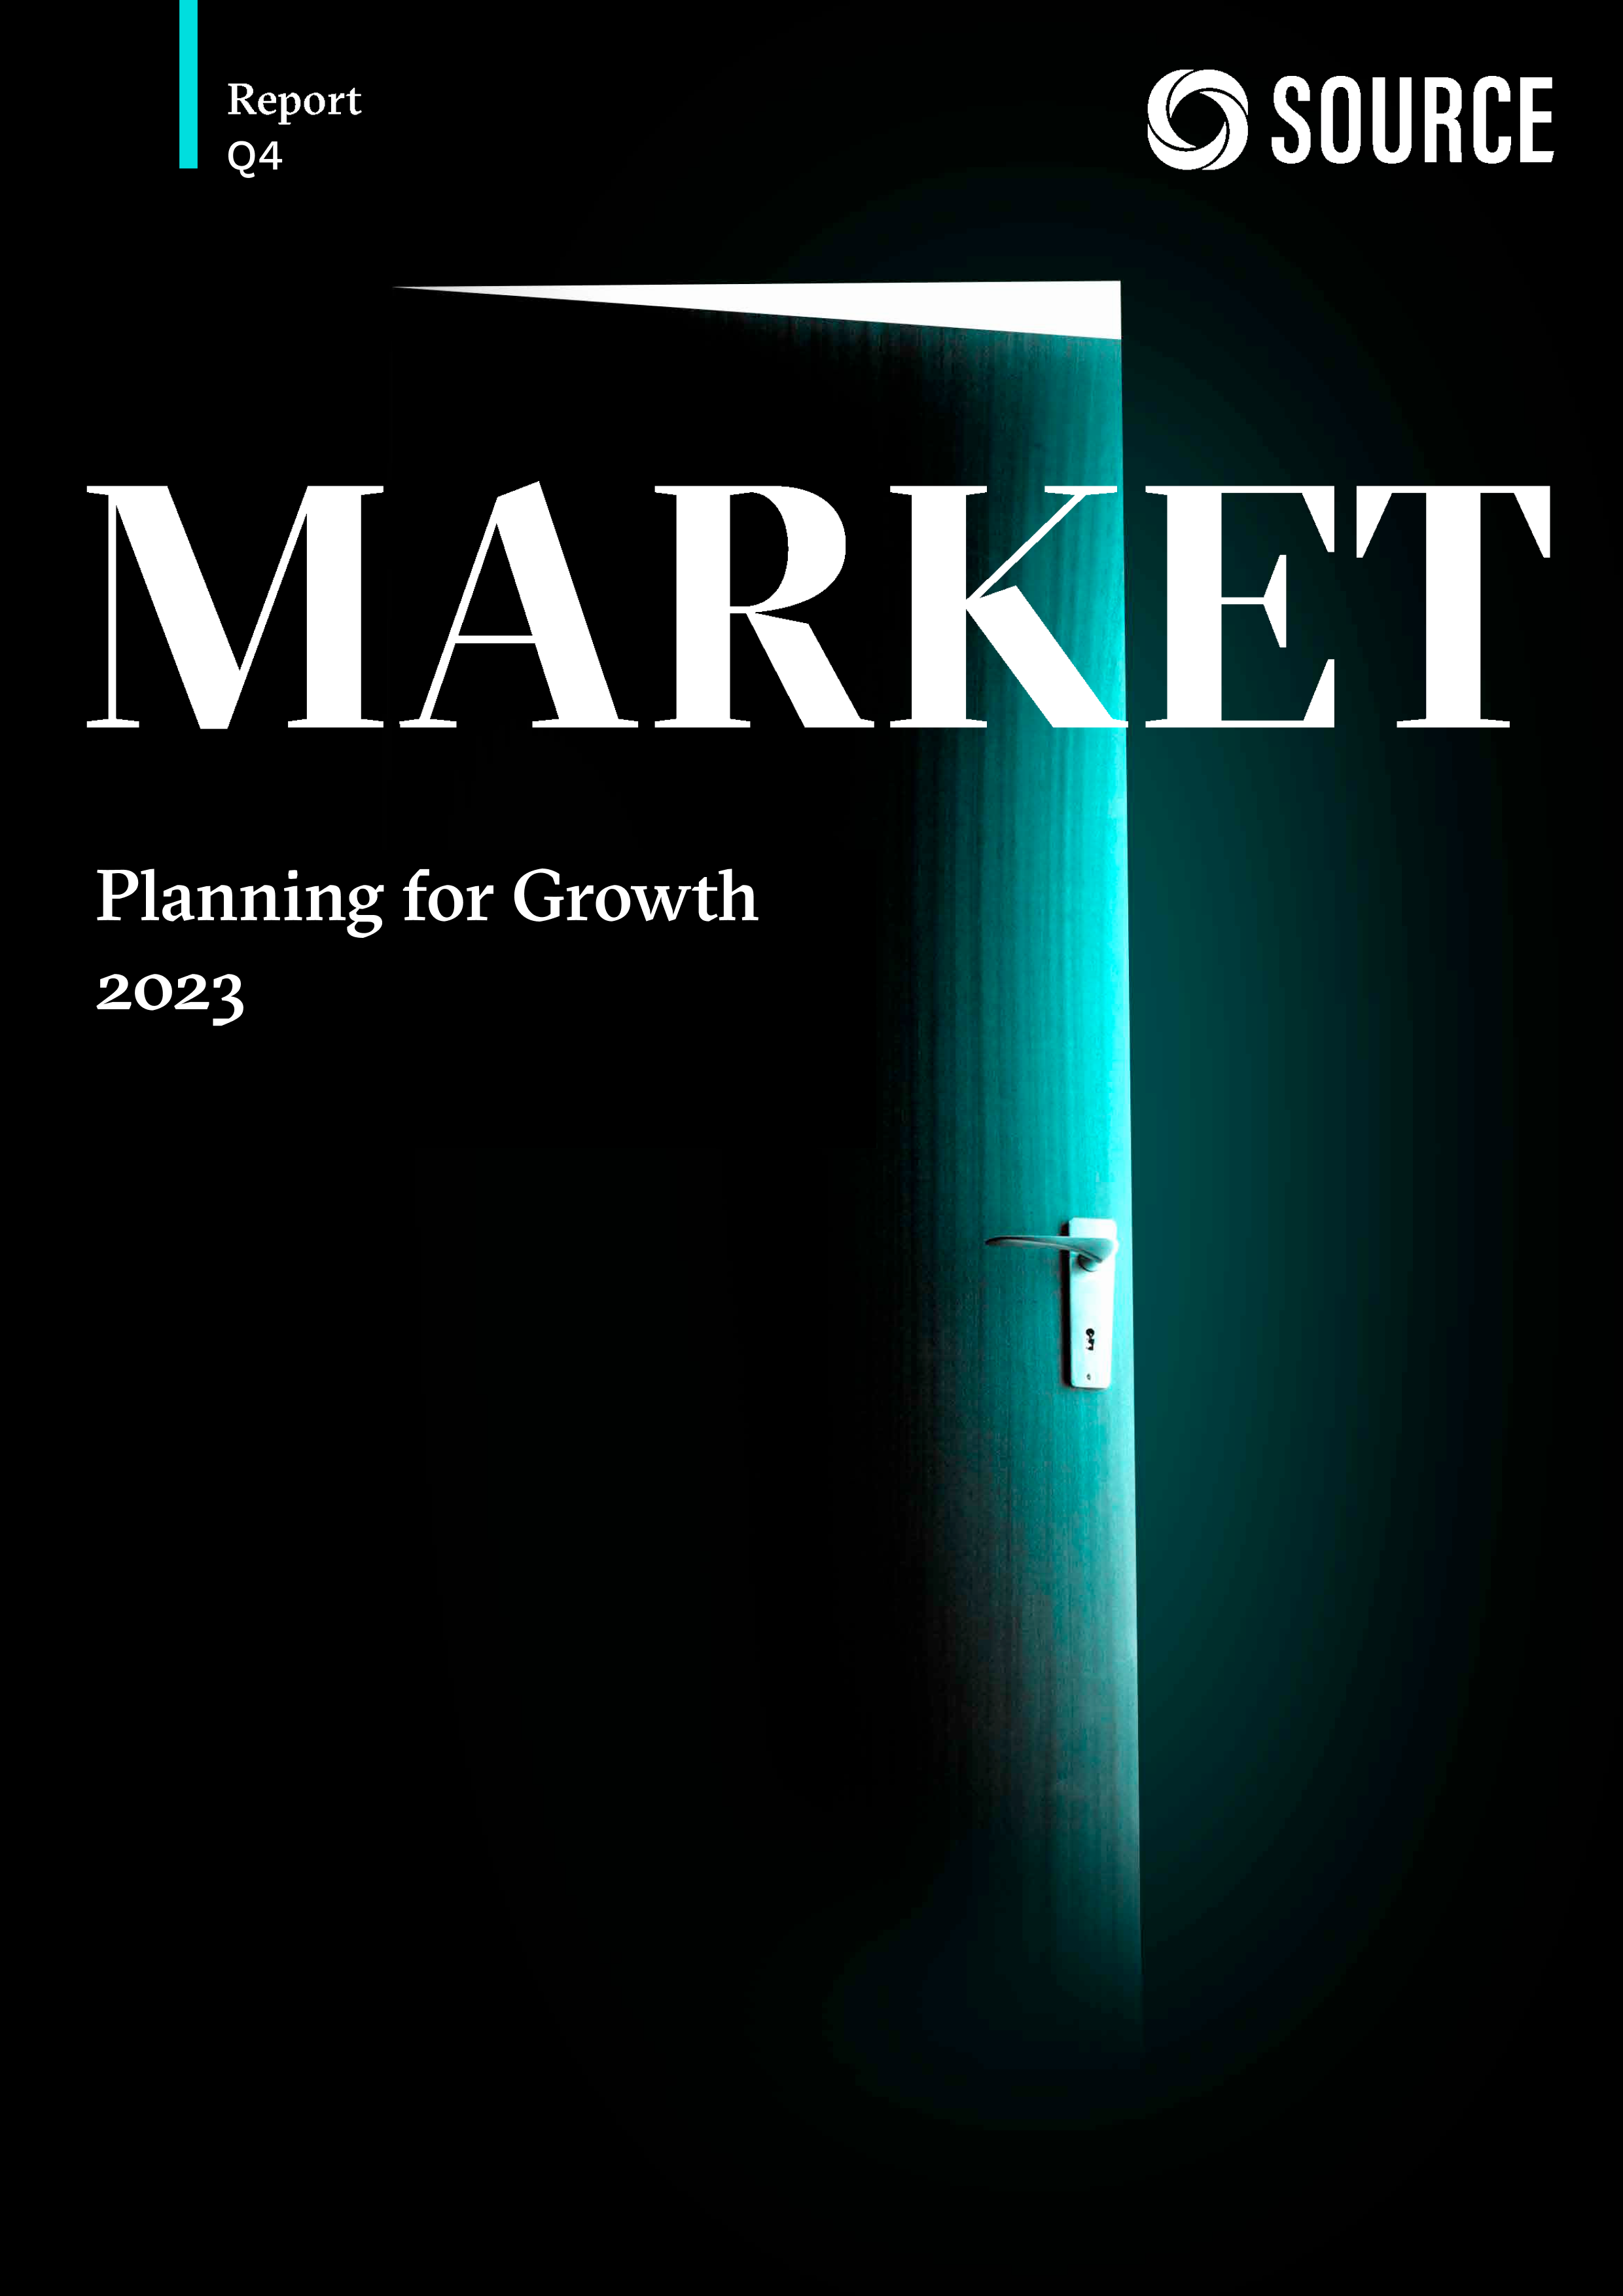 Report front cover - Planning for Growth in 2023